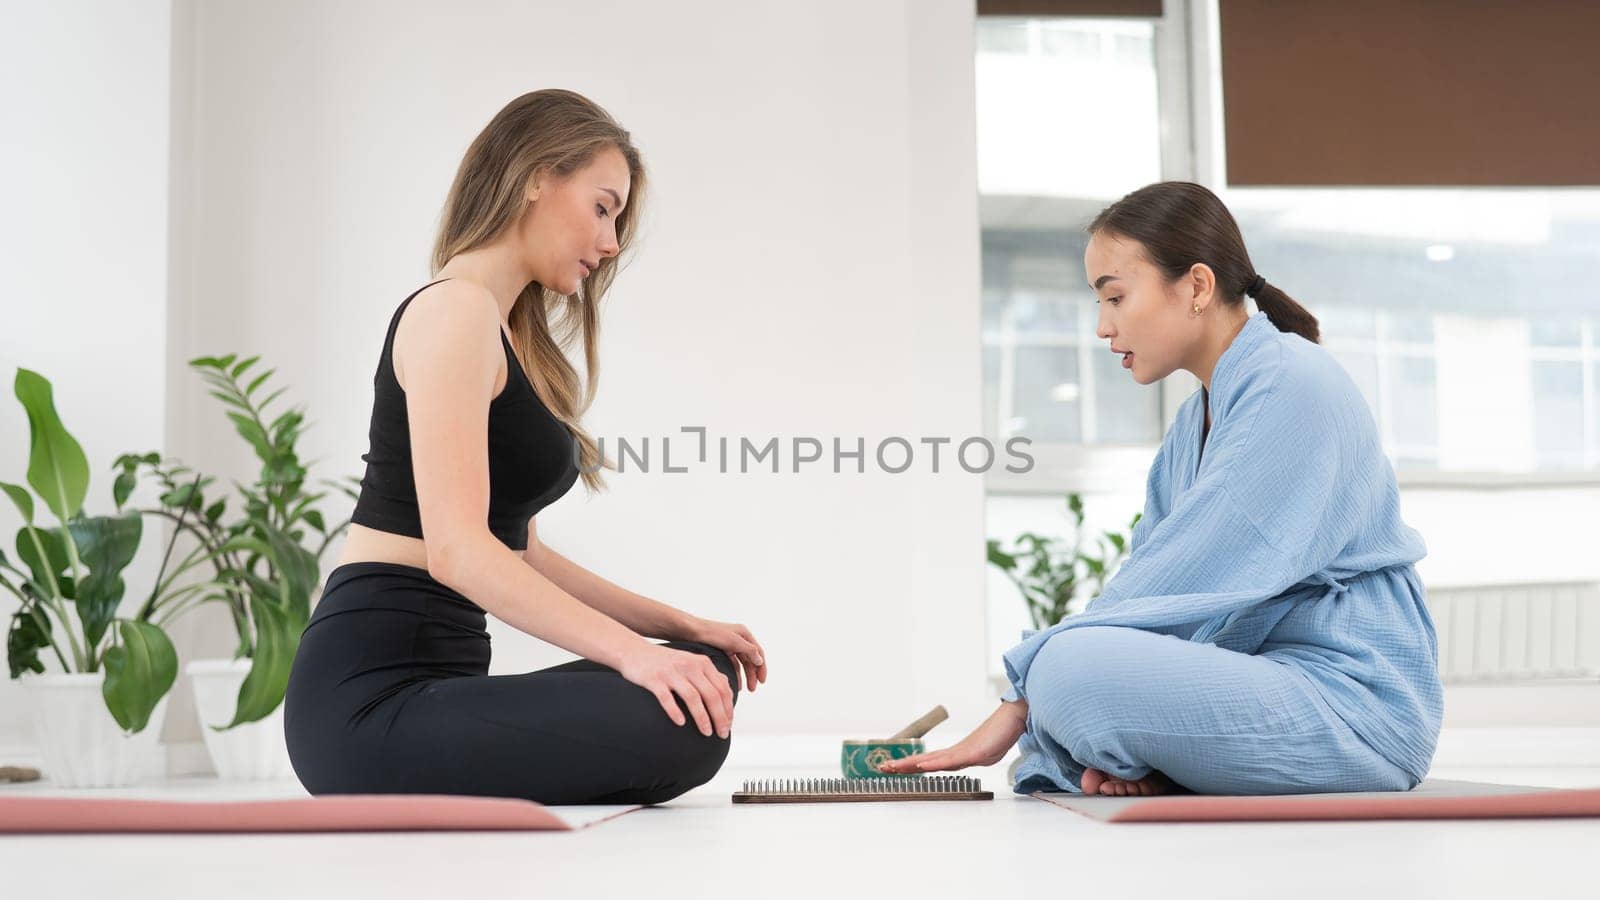 Caucasian and Asian women getting ready to stand on sadhu boards